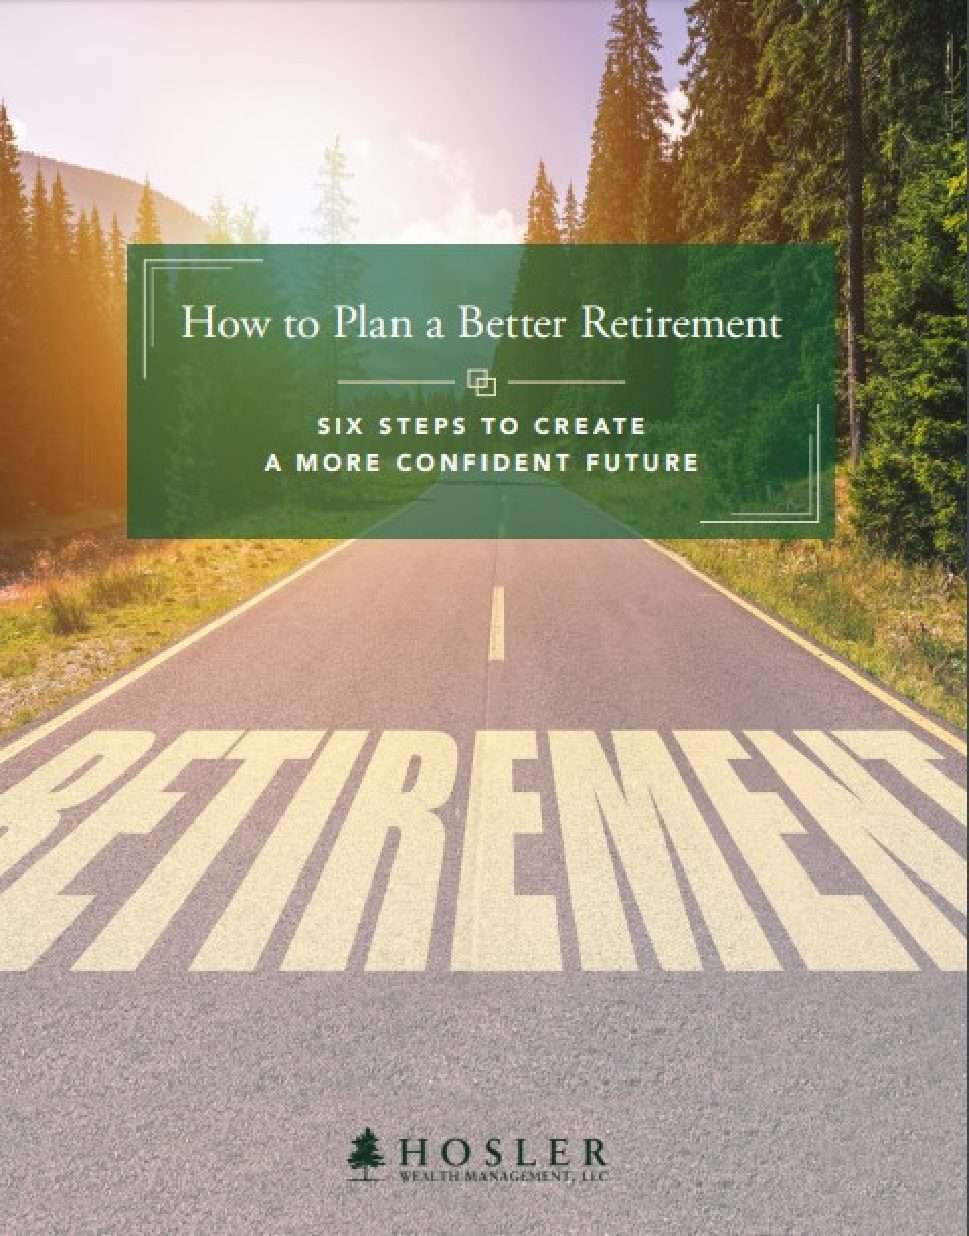 hosler ebook how to plan a better retirement - 6 steps to create a more confident future